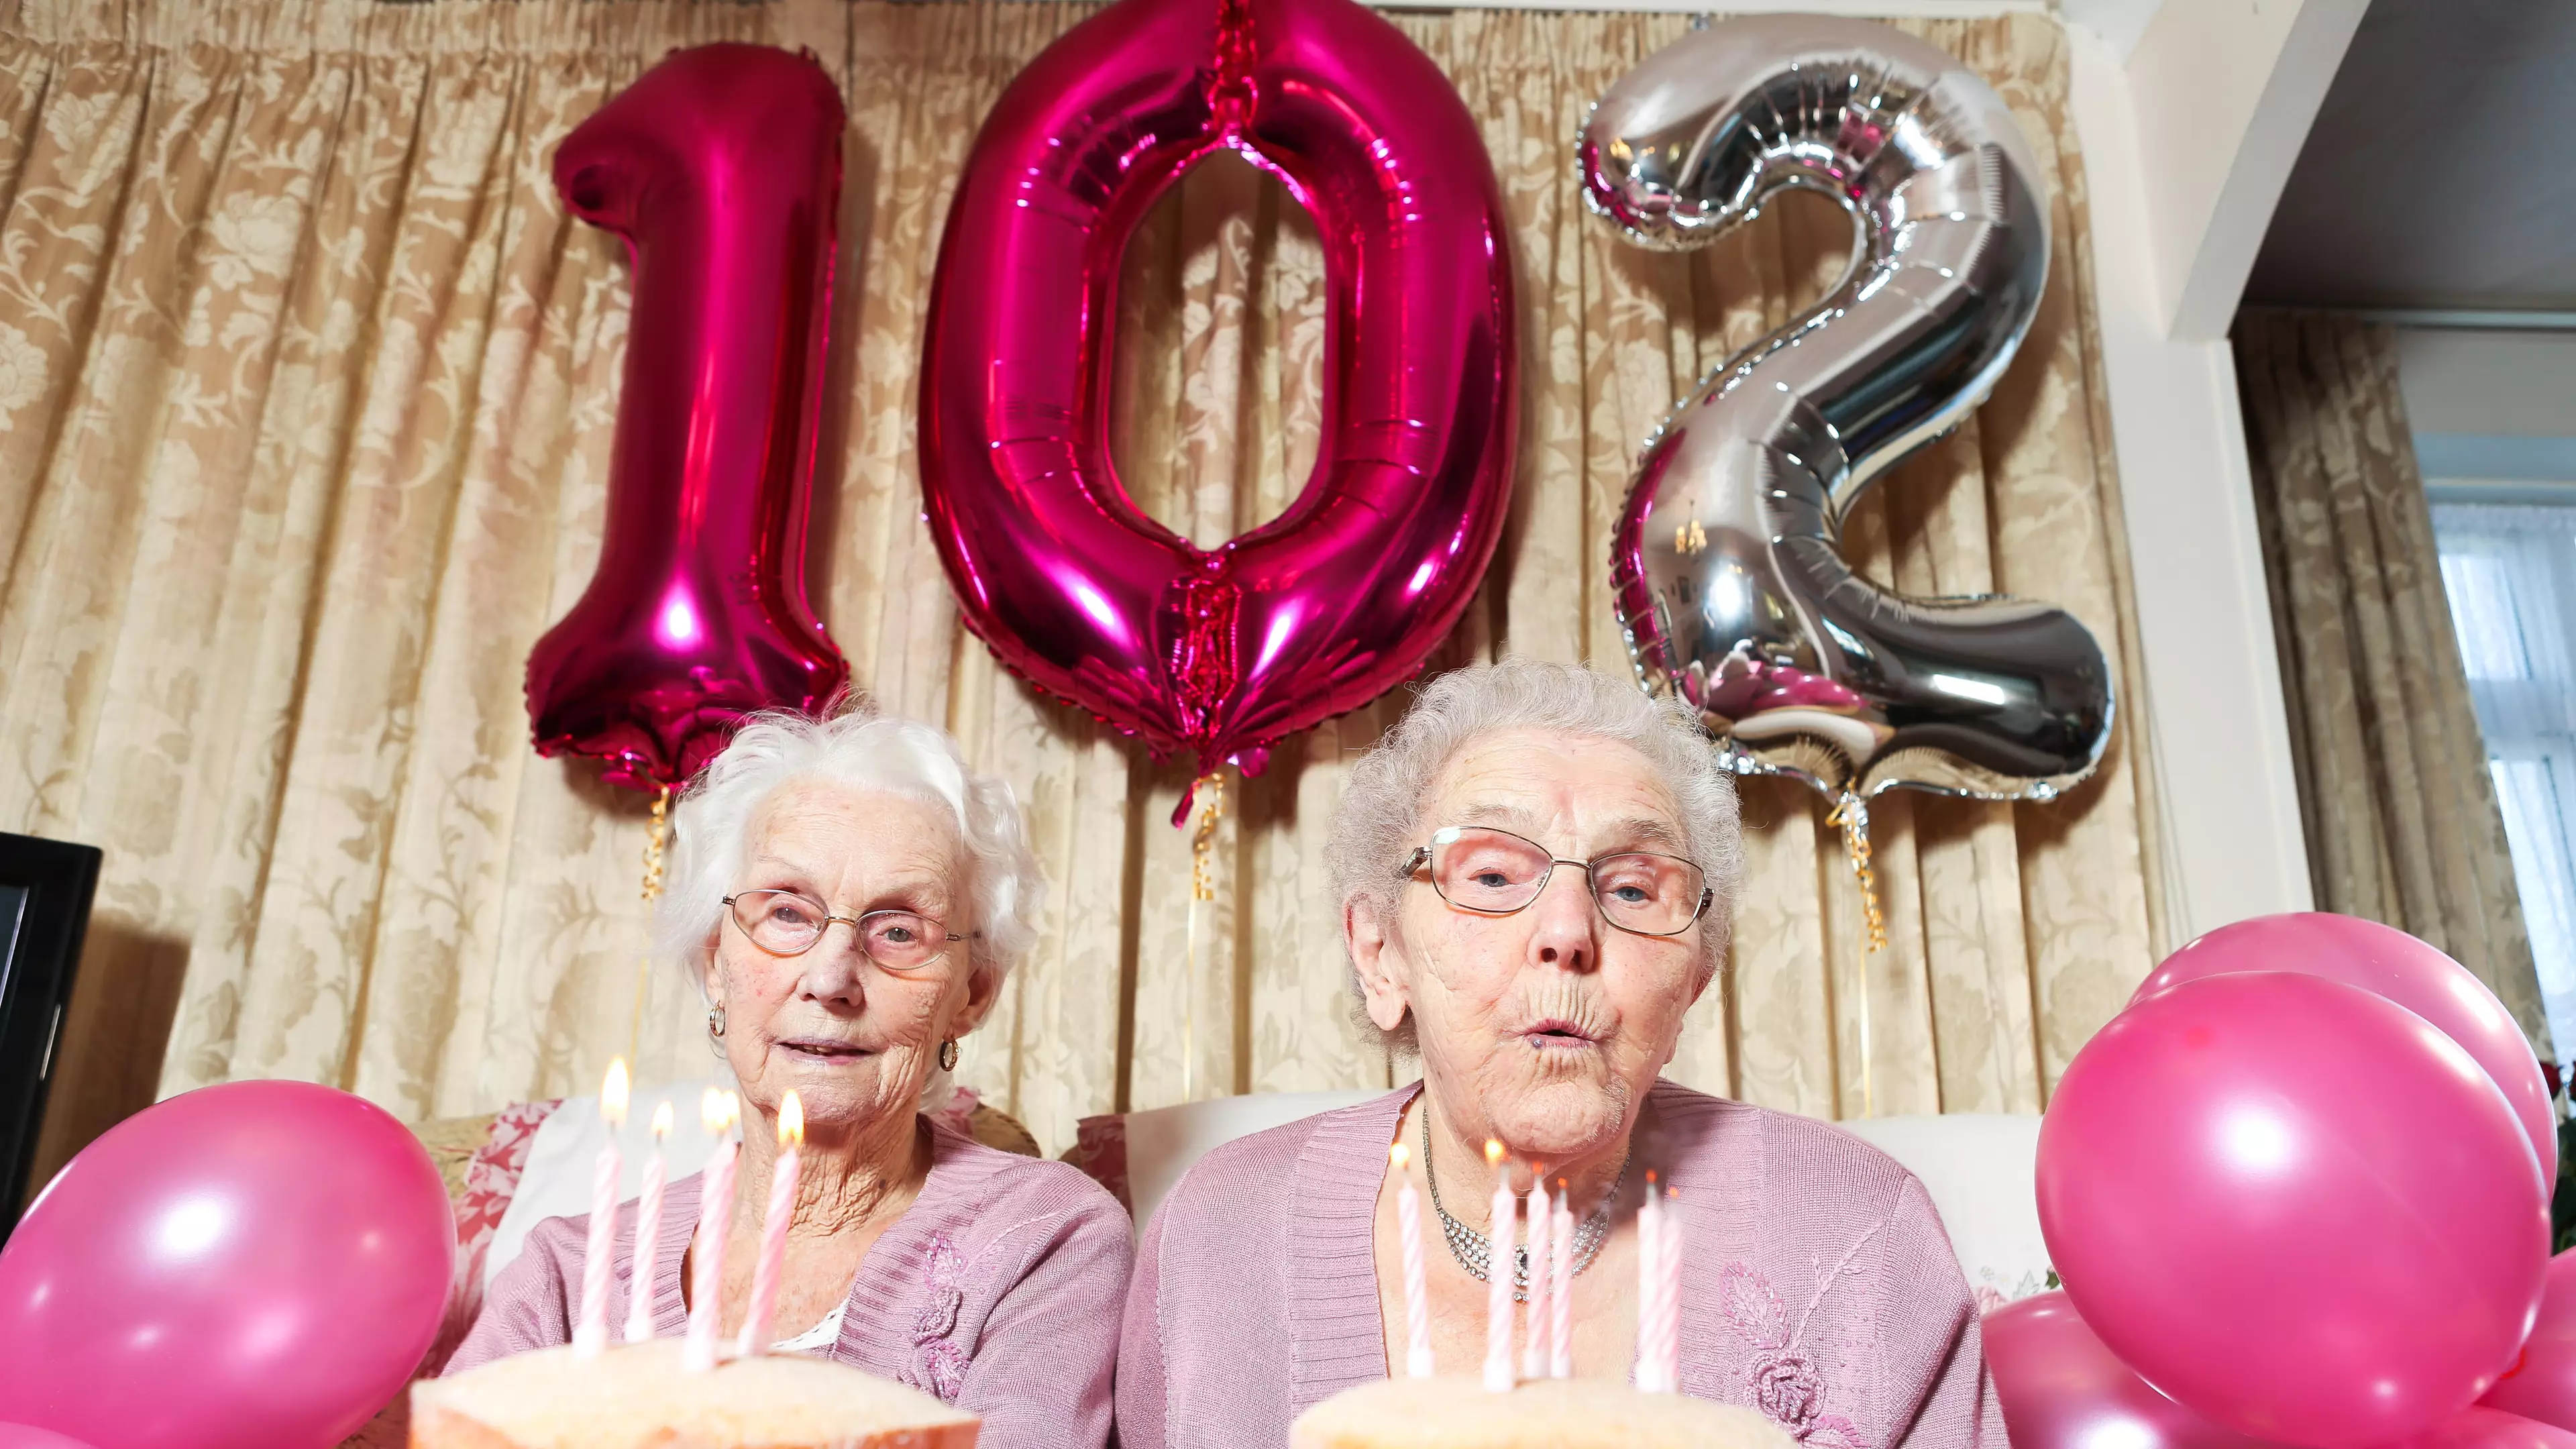 Britain's Oldest Twins Celebrating Their 102nd Birthday Share Secrets To Staying Young